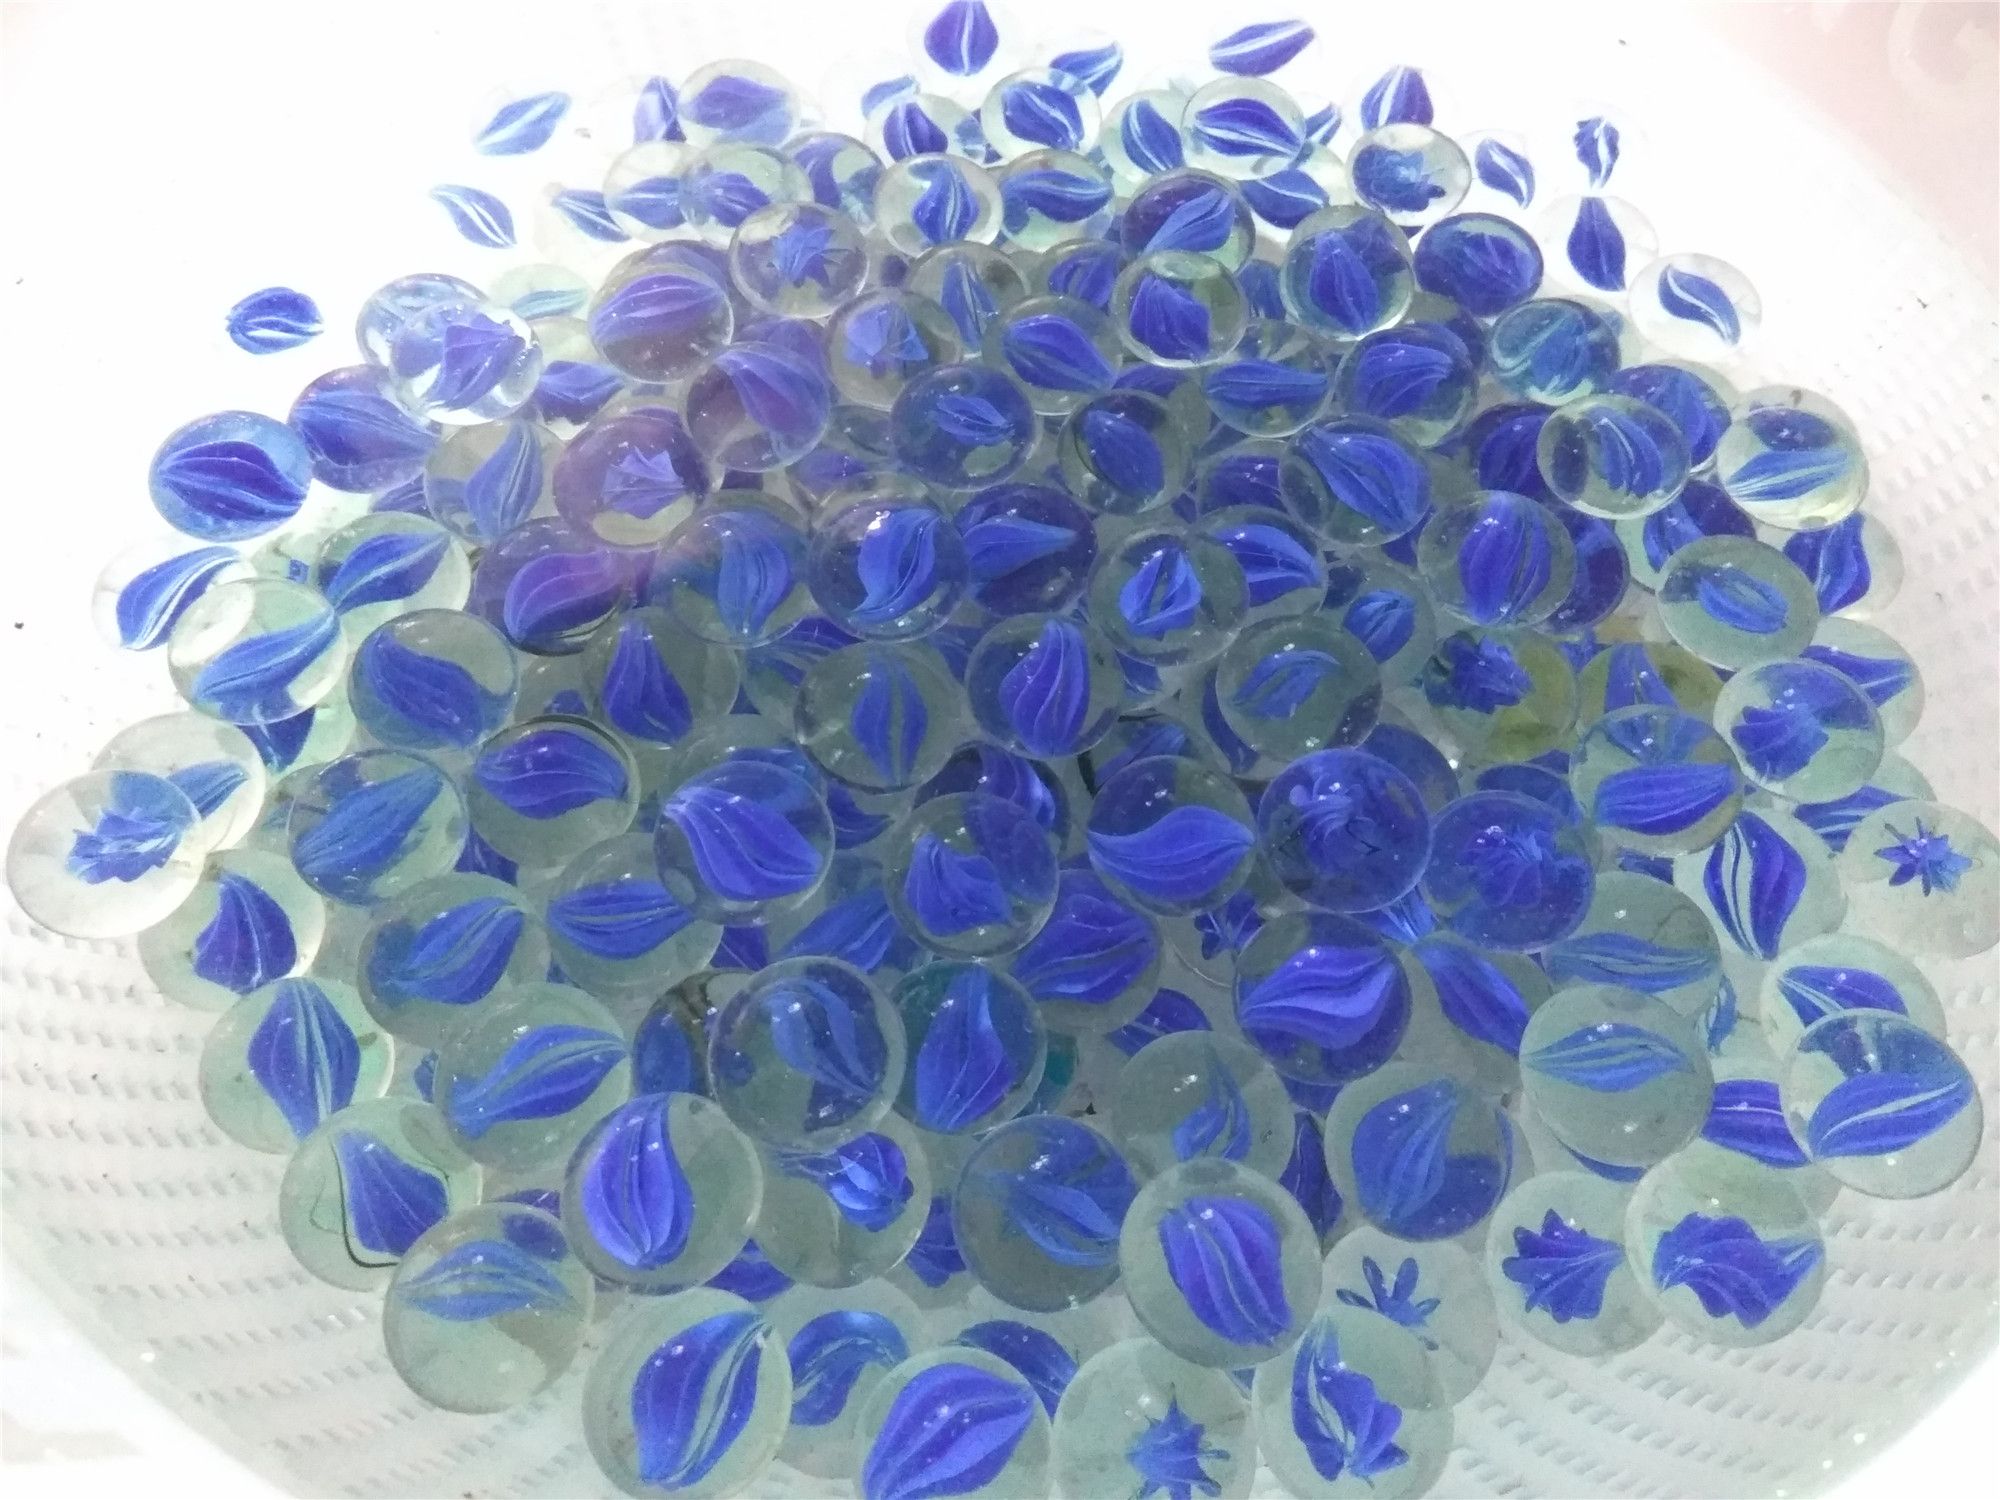 1 6 Cm Glass Marbles 8 Petals Pachinko Glass Ball Blue Garden Wall Or Pavement Decoration Stone Checkers Pet Cat Toy Fish Tank Vase Filler Unique Home